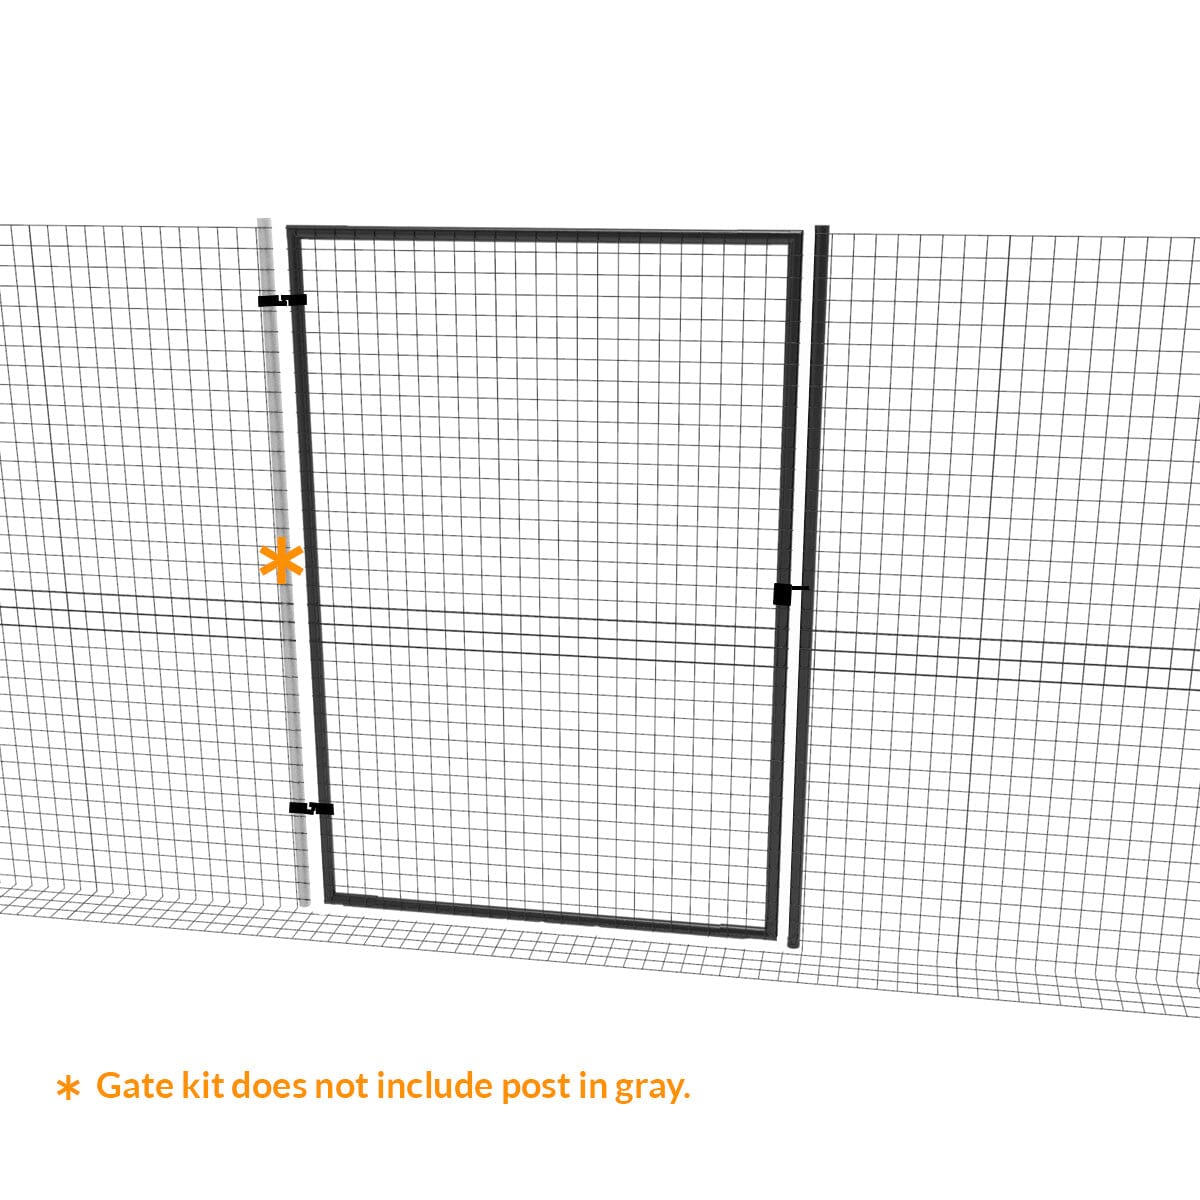 Dog Proofer&#39;s freestanding fence with a gate, illustrating entryway integration.